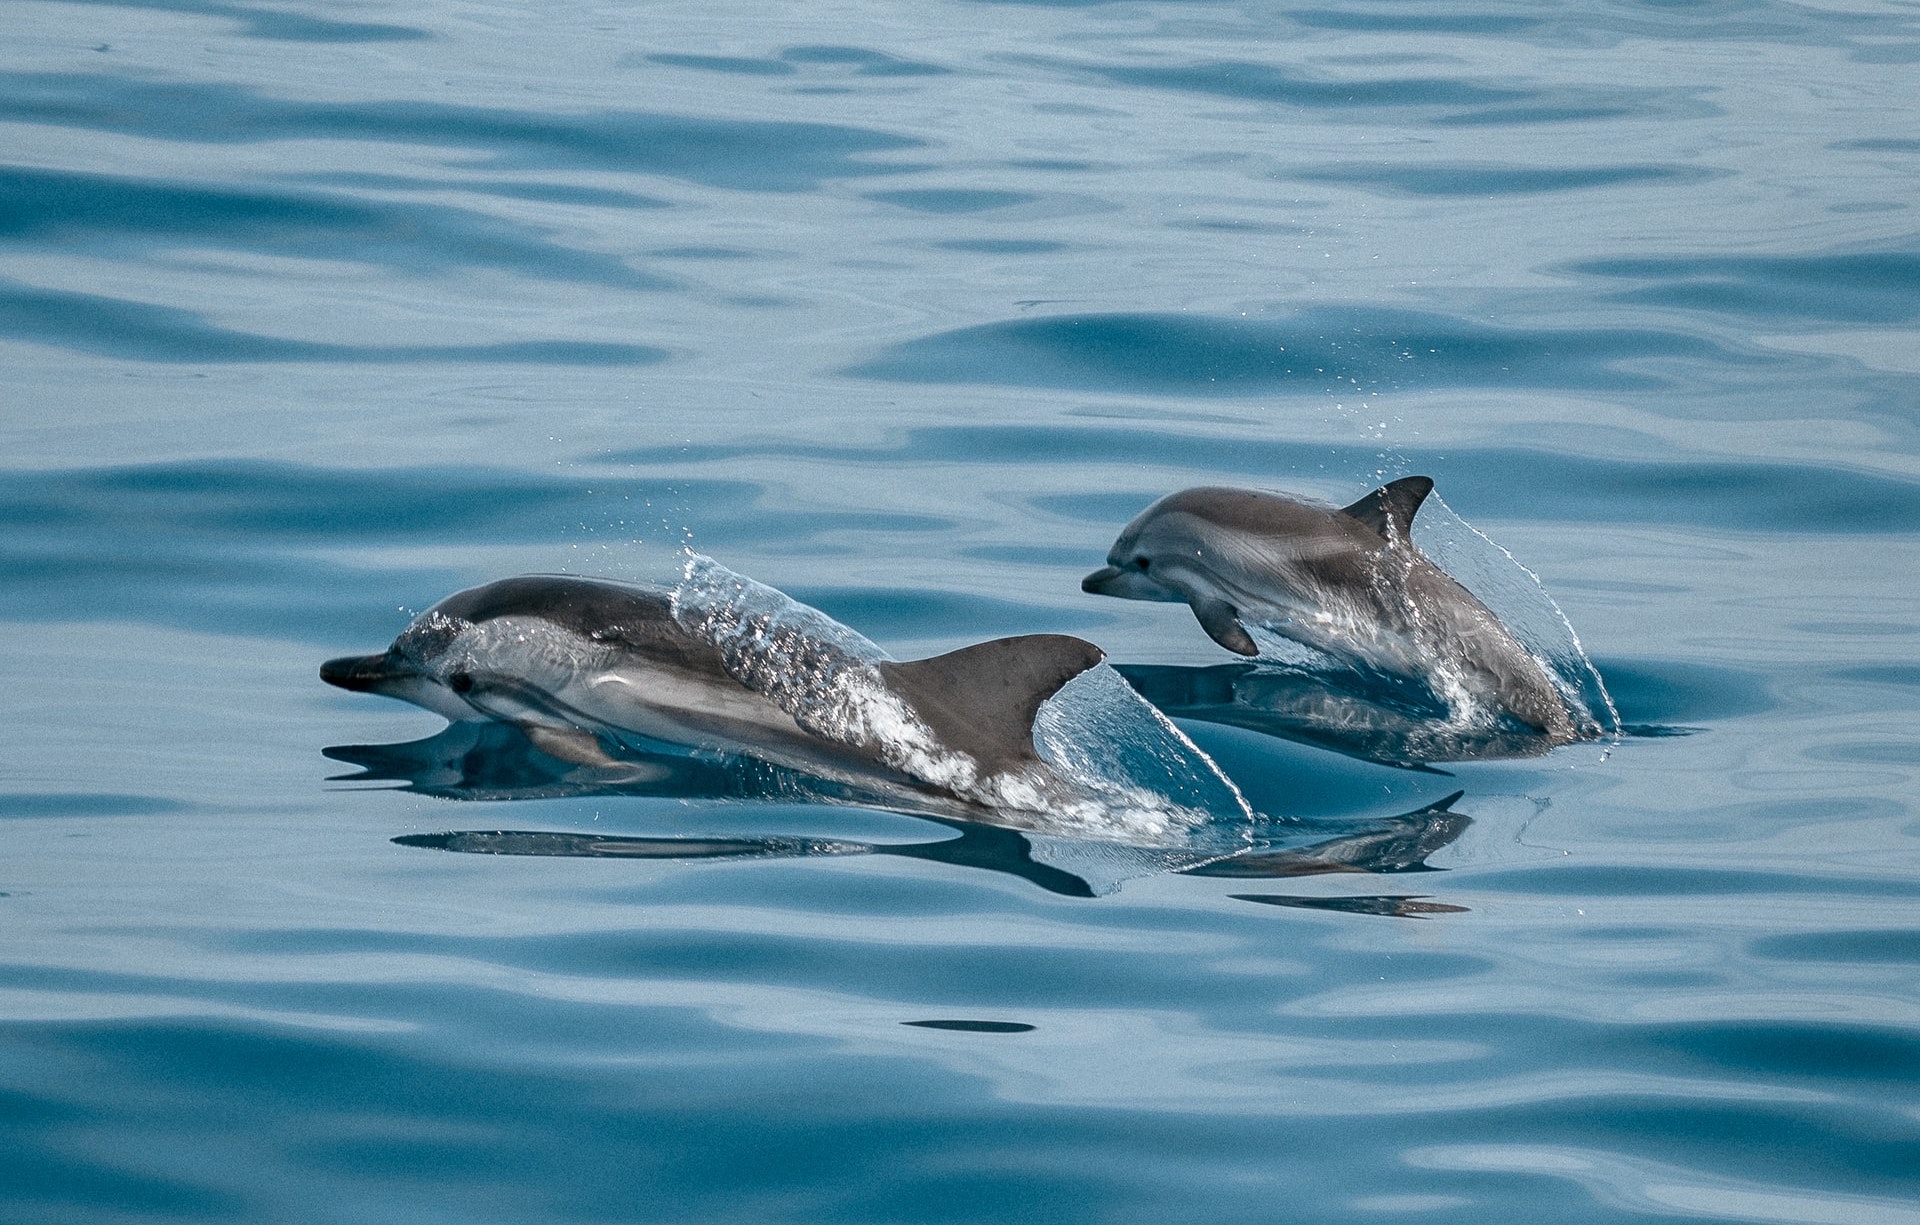 Dolphins Call Each Other by Their Names